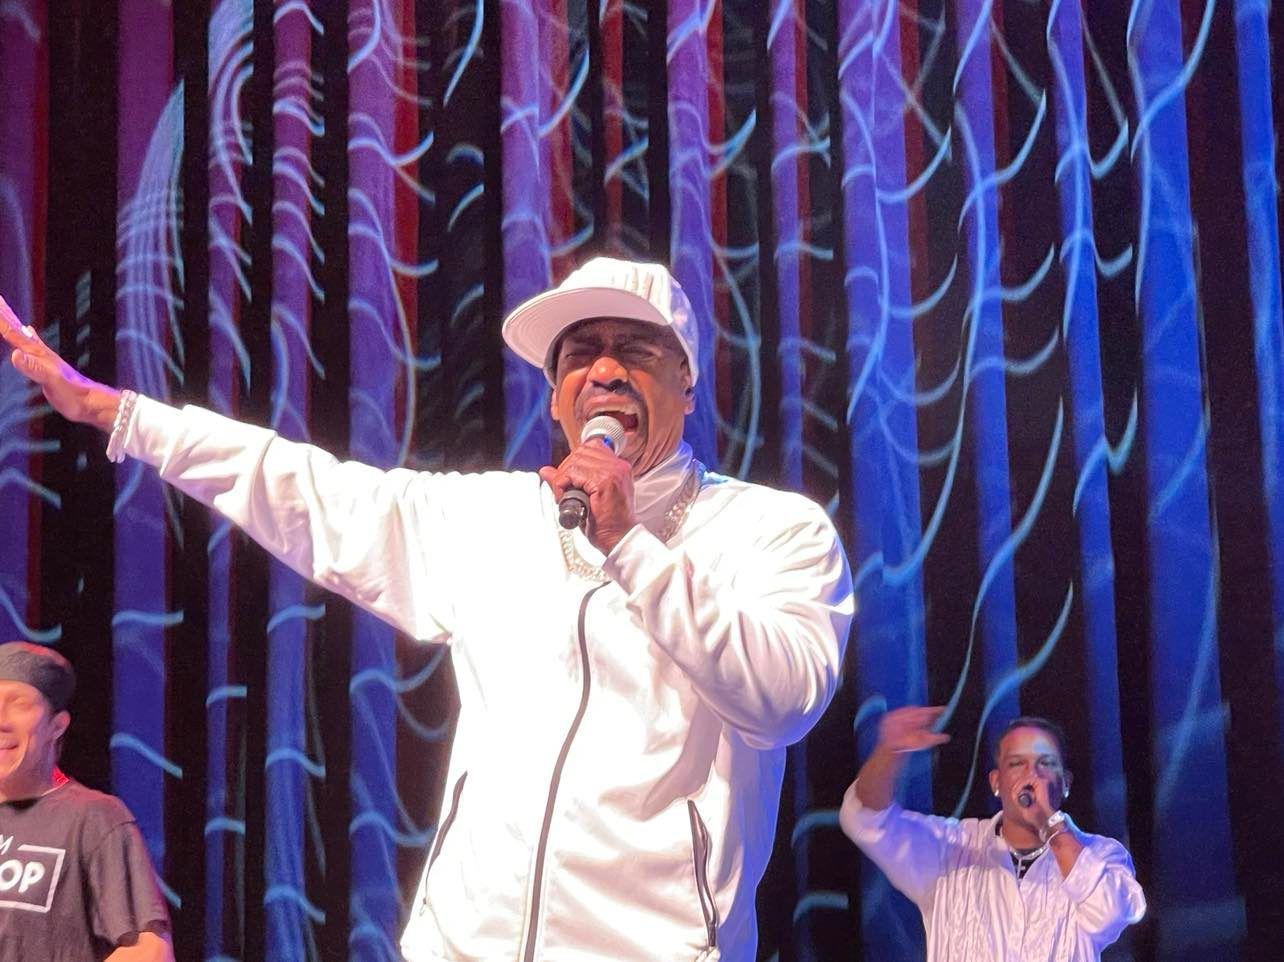 Kurtis Blow performs classic Hip Hop at 2022 NAACP Convention. Photo credit: Mark Tyler